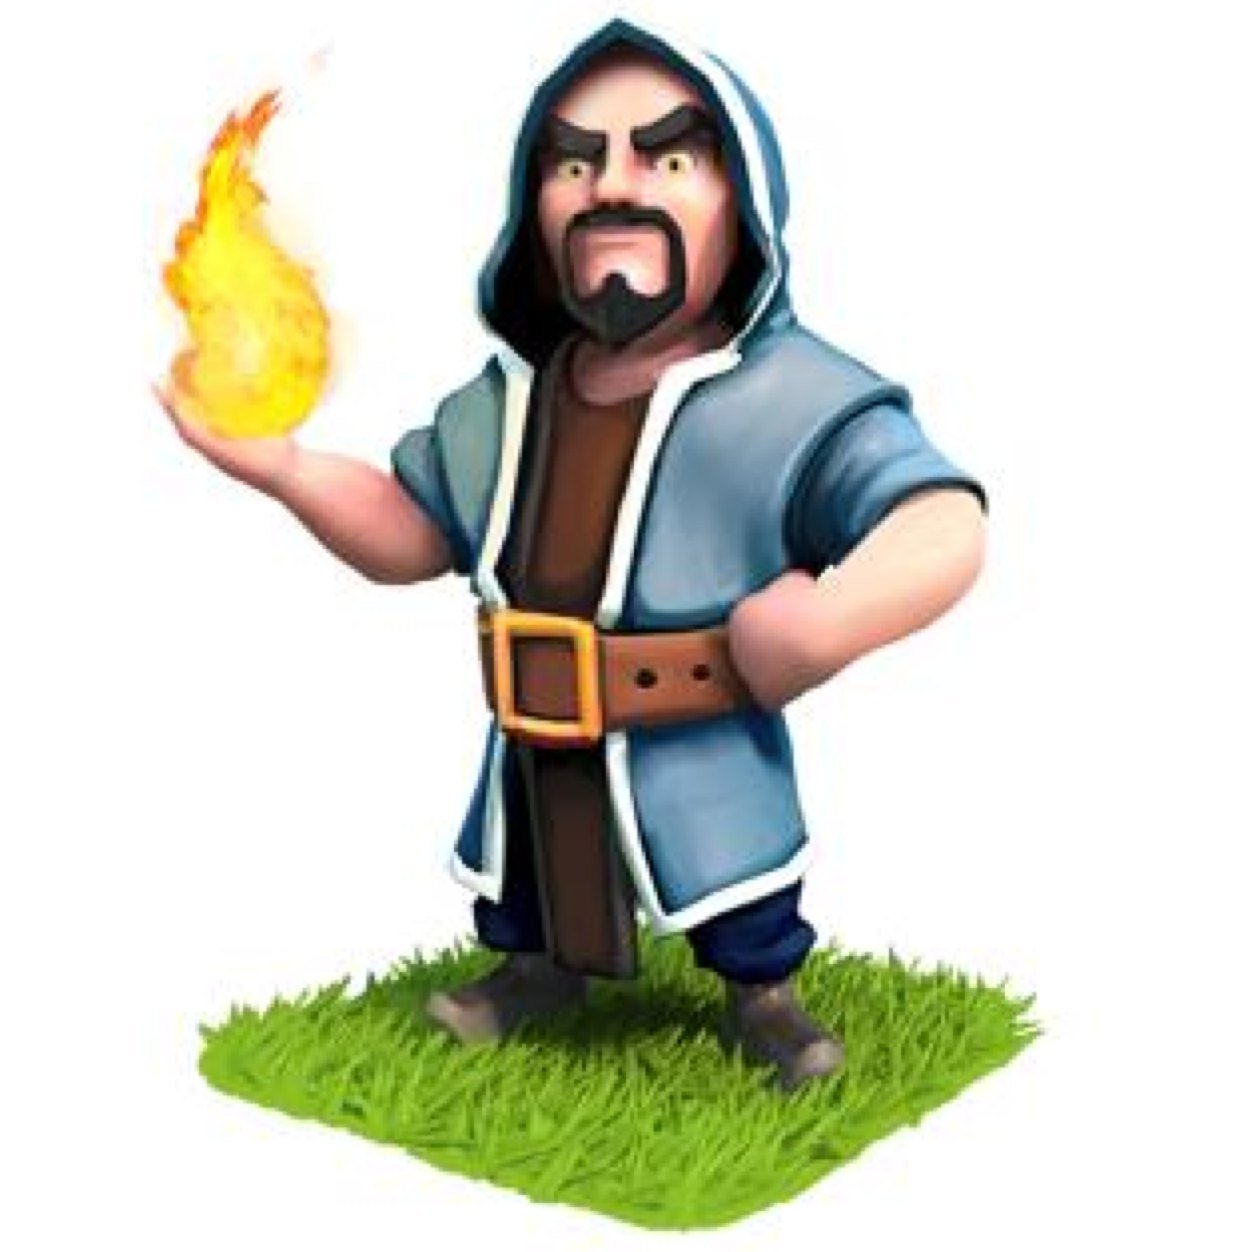 Wizard From Clash Royale - 1252x1252 Wallpaper 